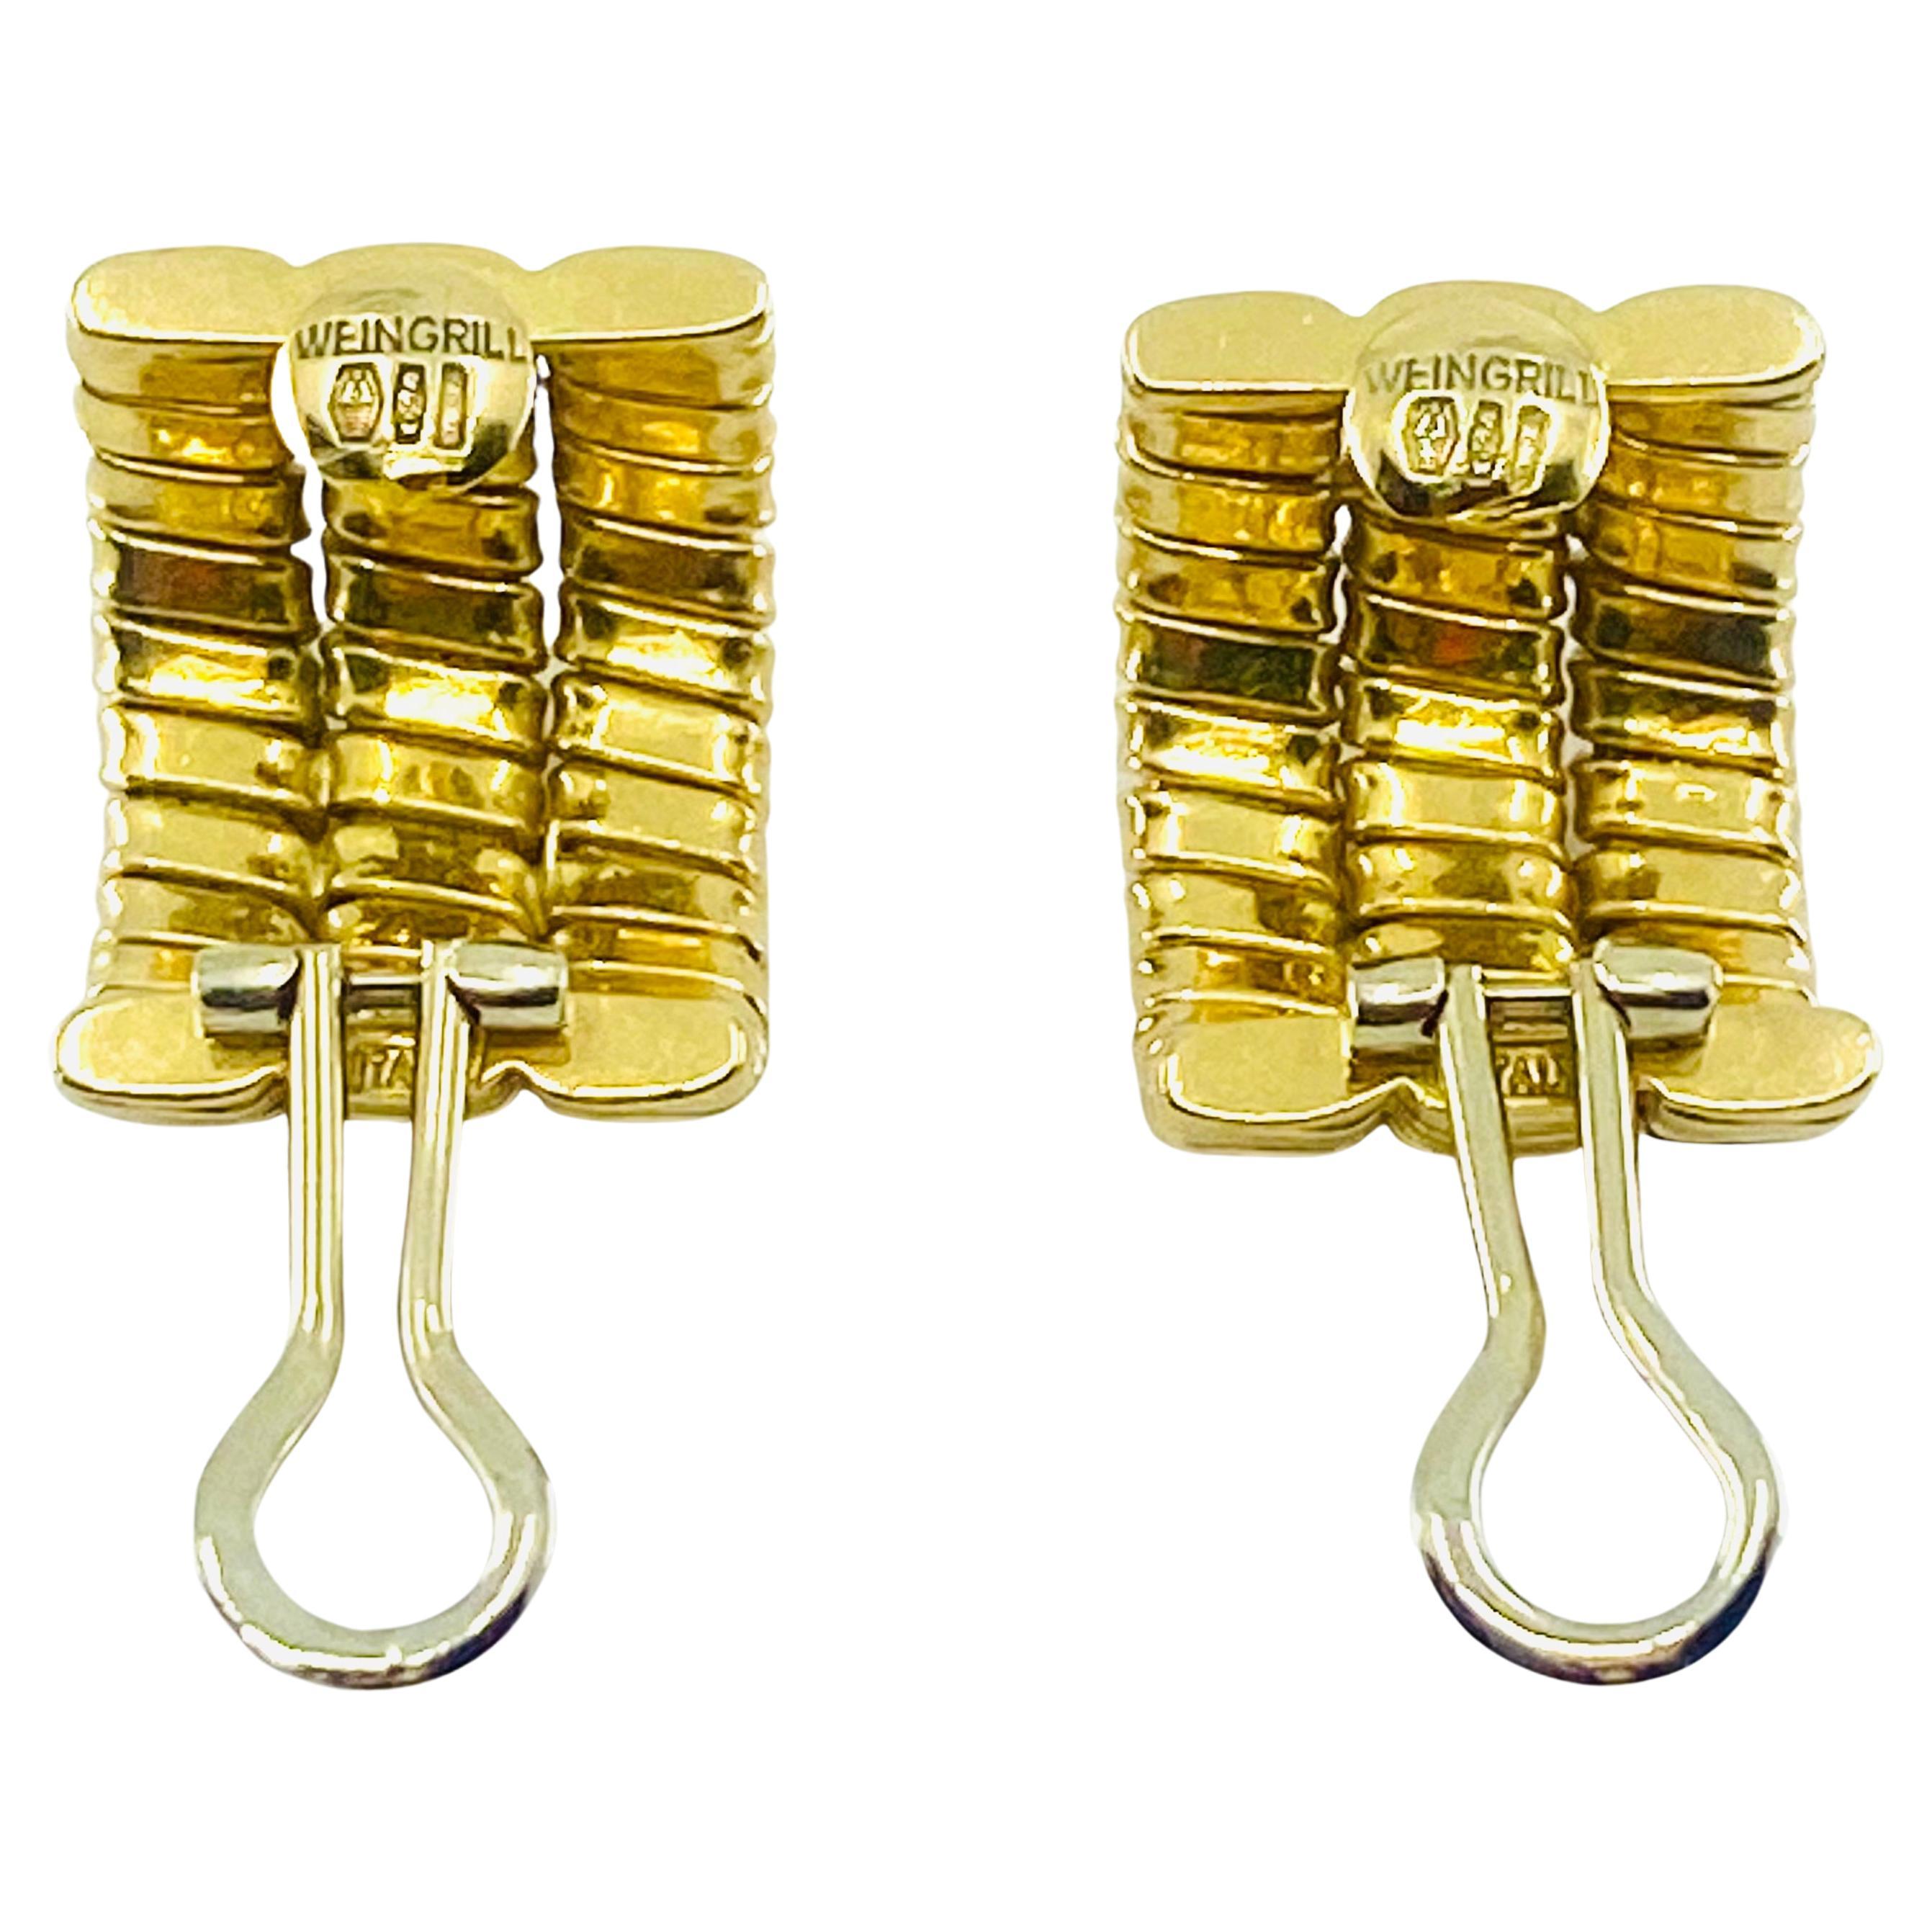 Carlo Weingrill 18k Gold Earrings Tubogas  2